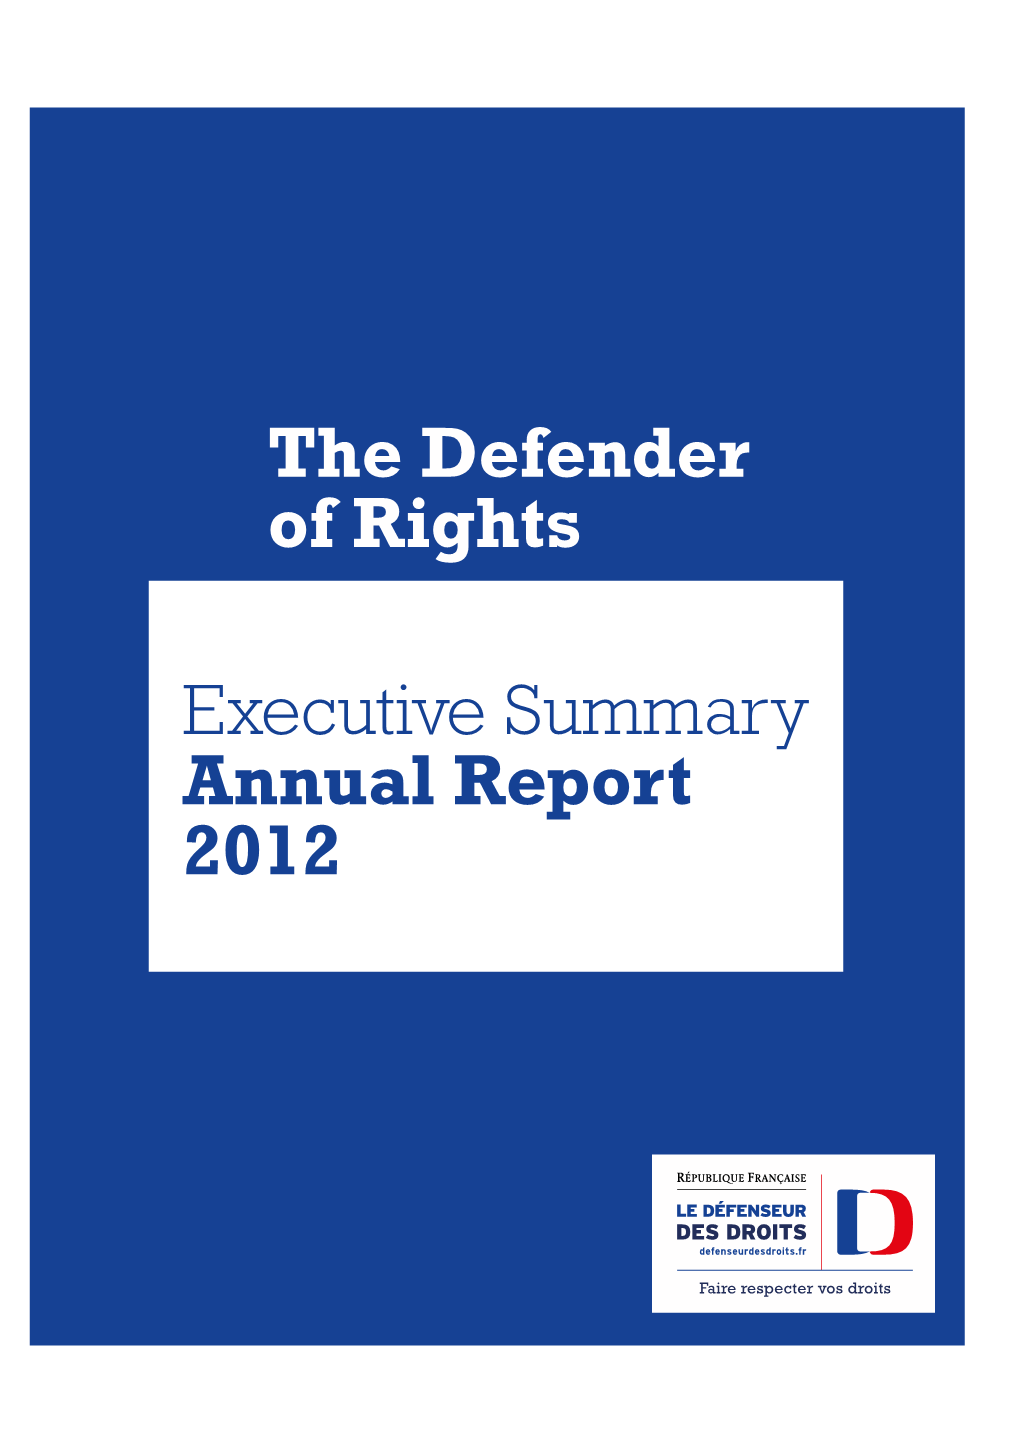 Executive Summary Annual Report 2012 the Defender of Rights